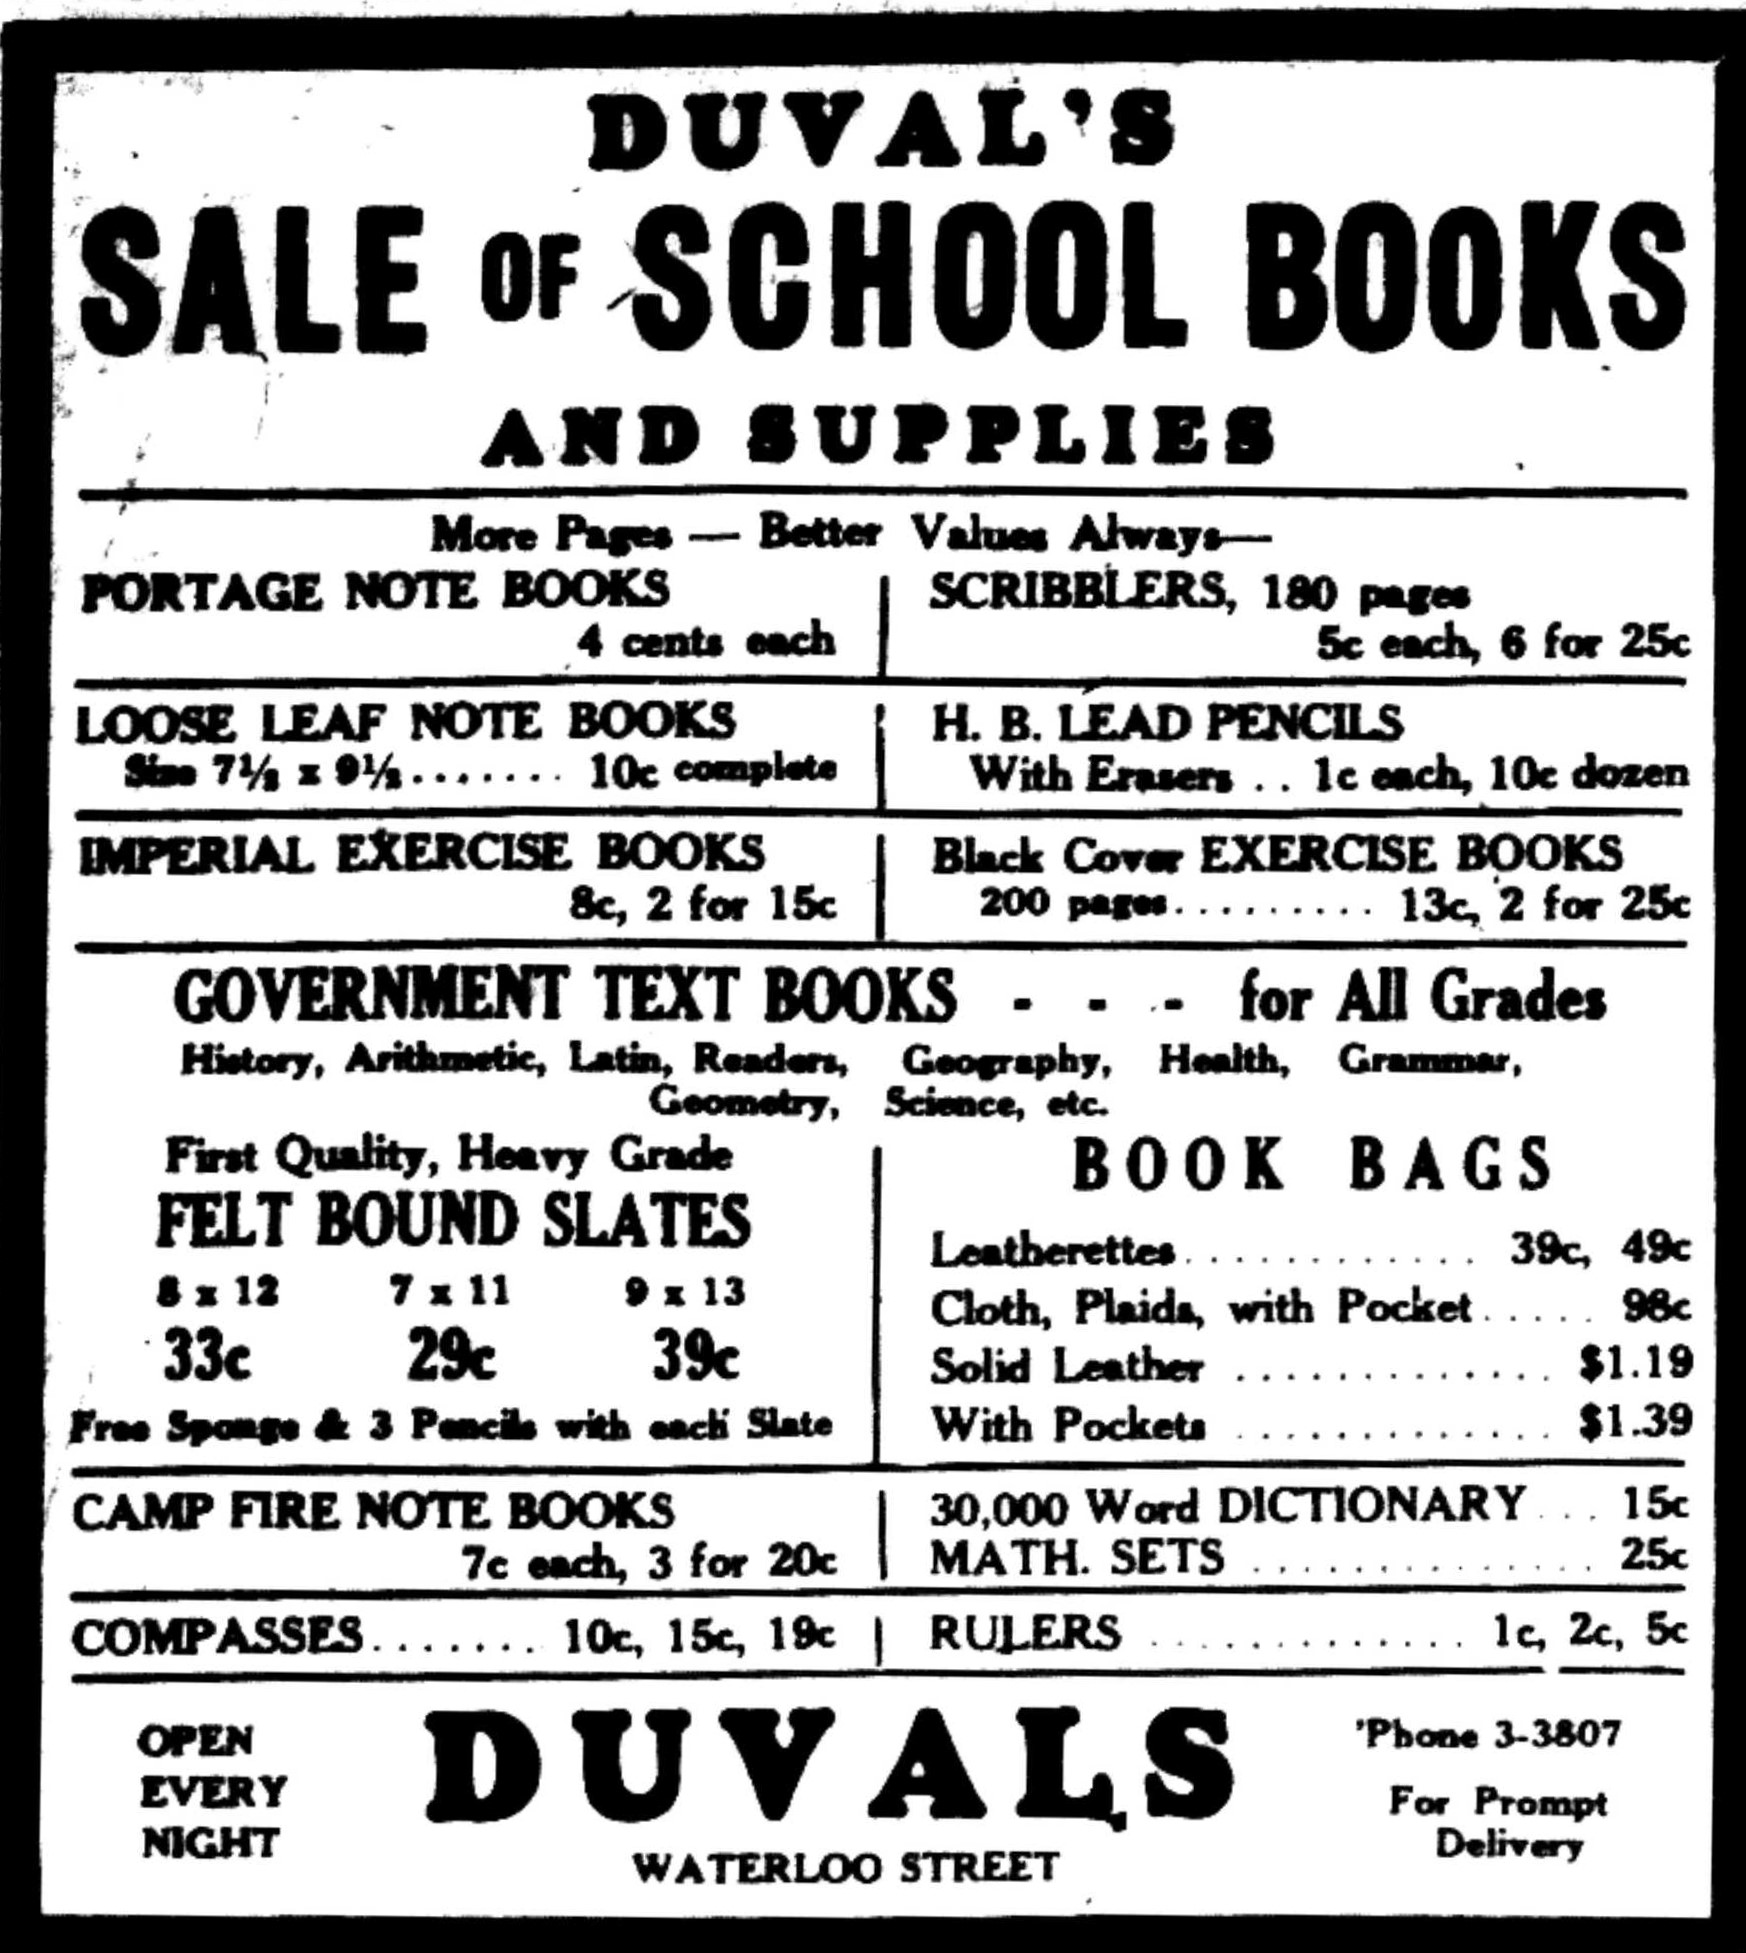 Newspaper advertisement – “Duval’s – Sale of School Books and Supplies” – listing of items with prices.